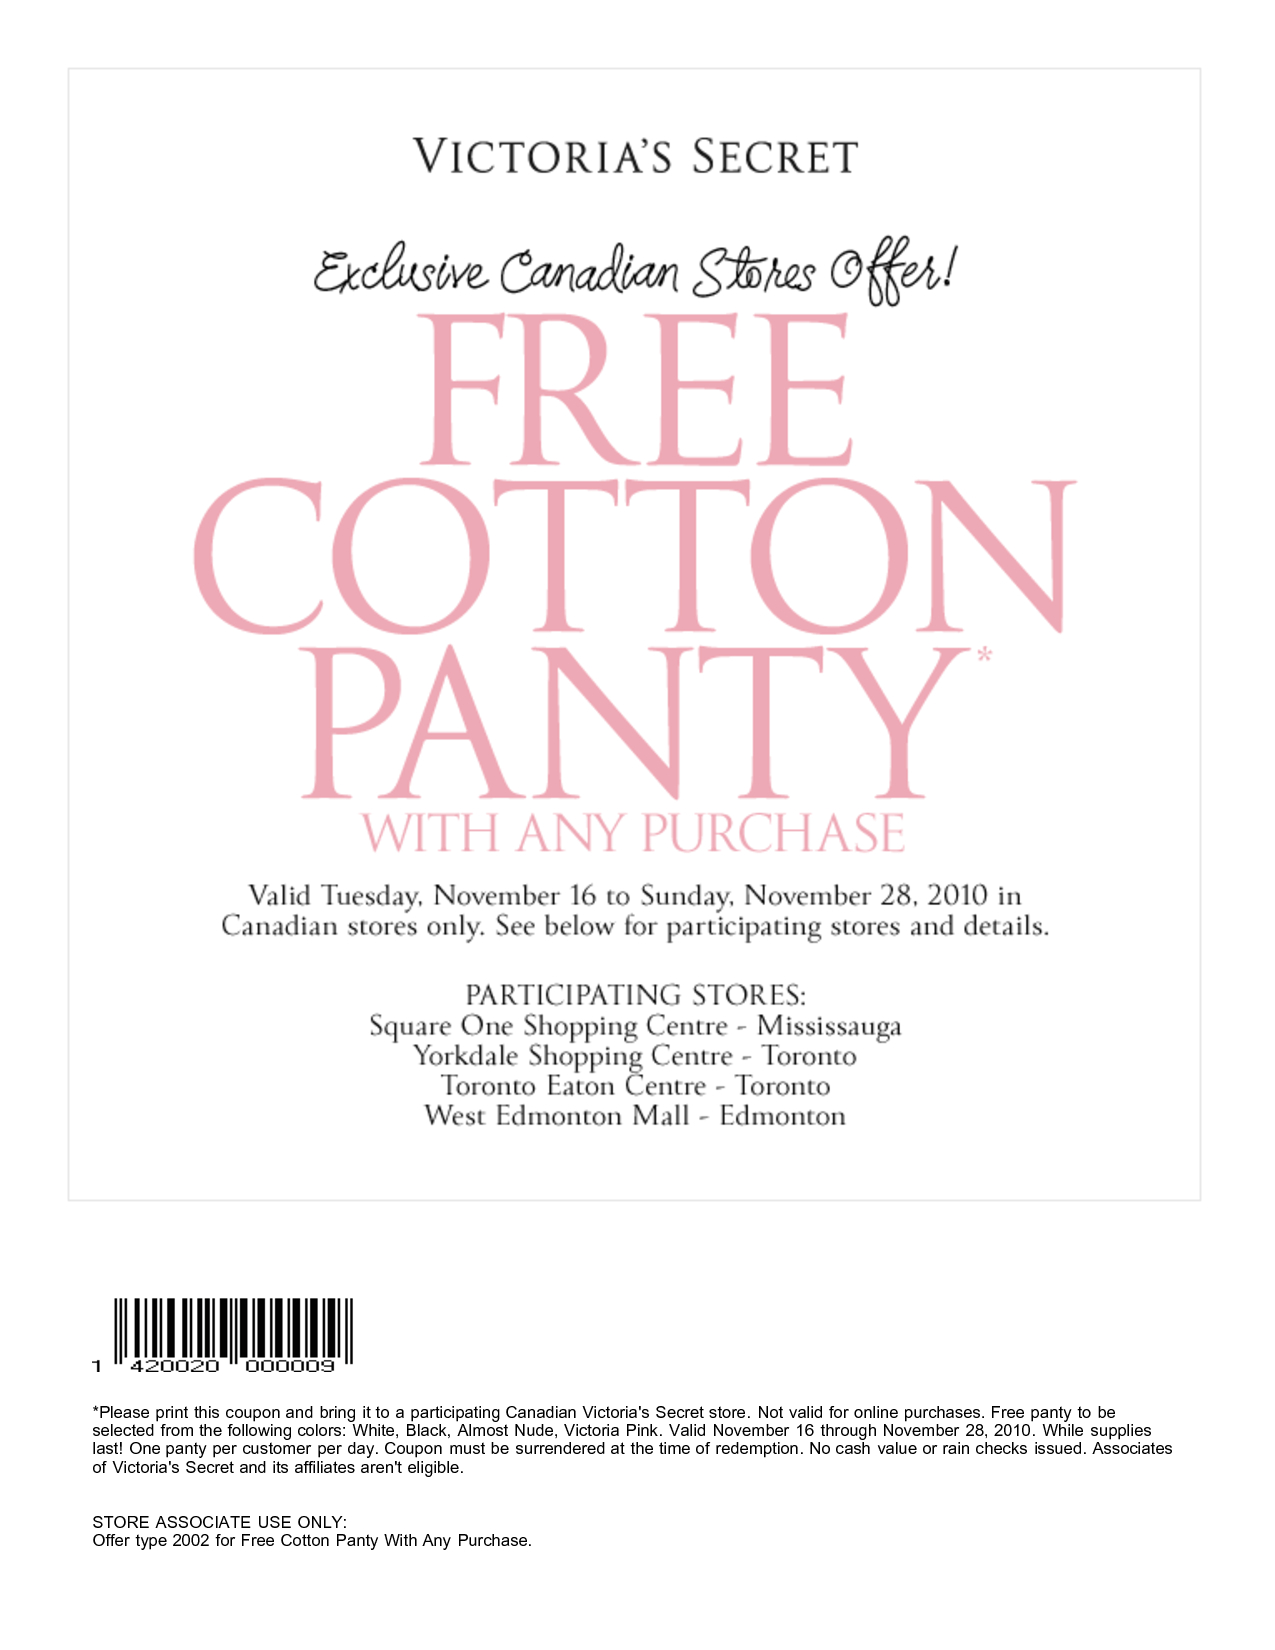 Victorias Secret Coupons Code 2017 | Printable Coupons Online - Free Printable Coupons 2017